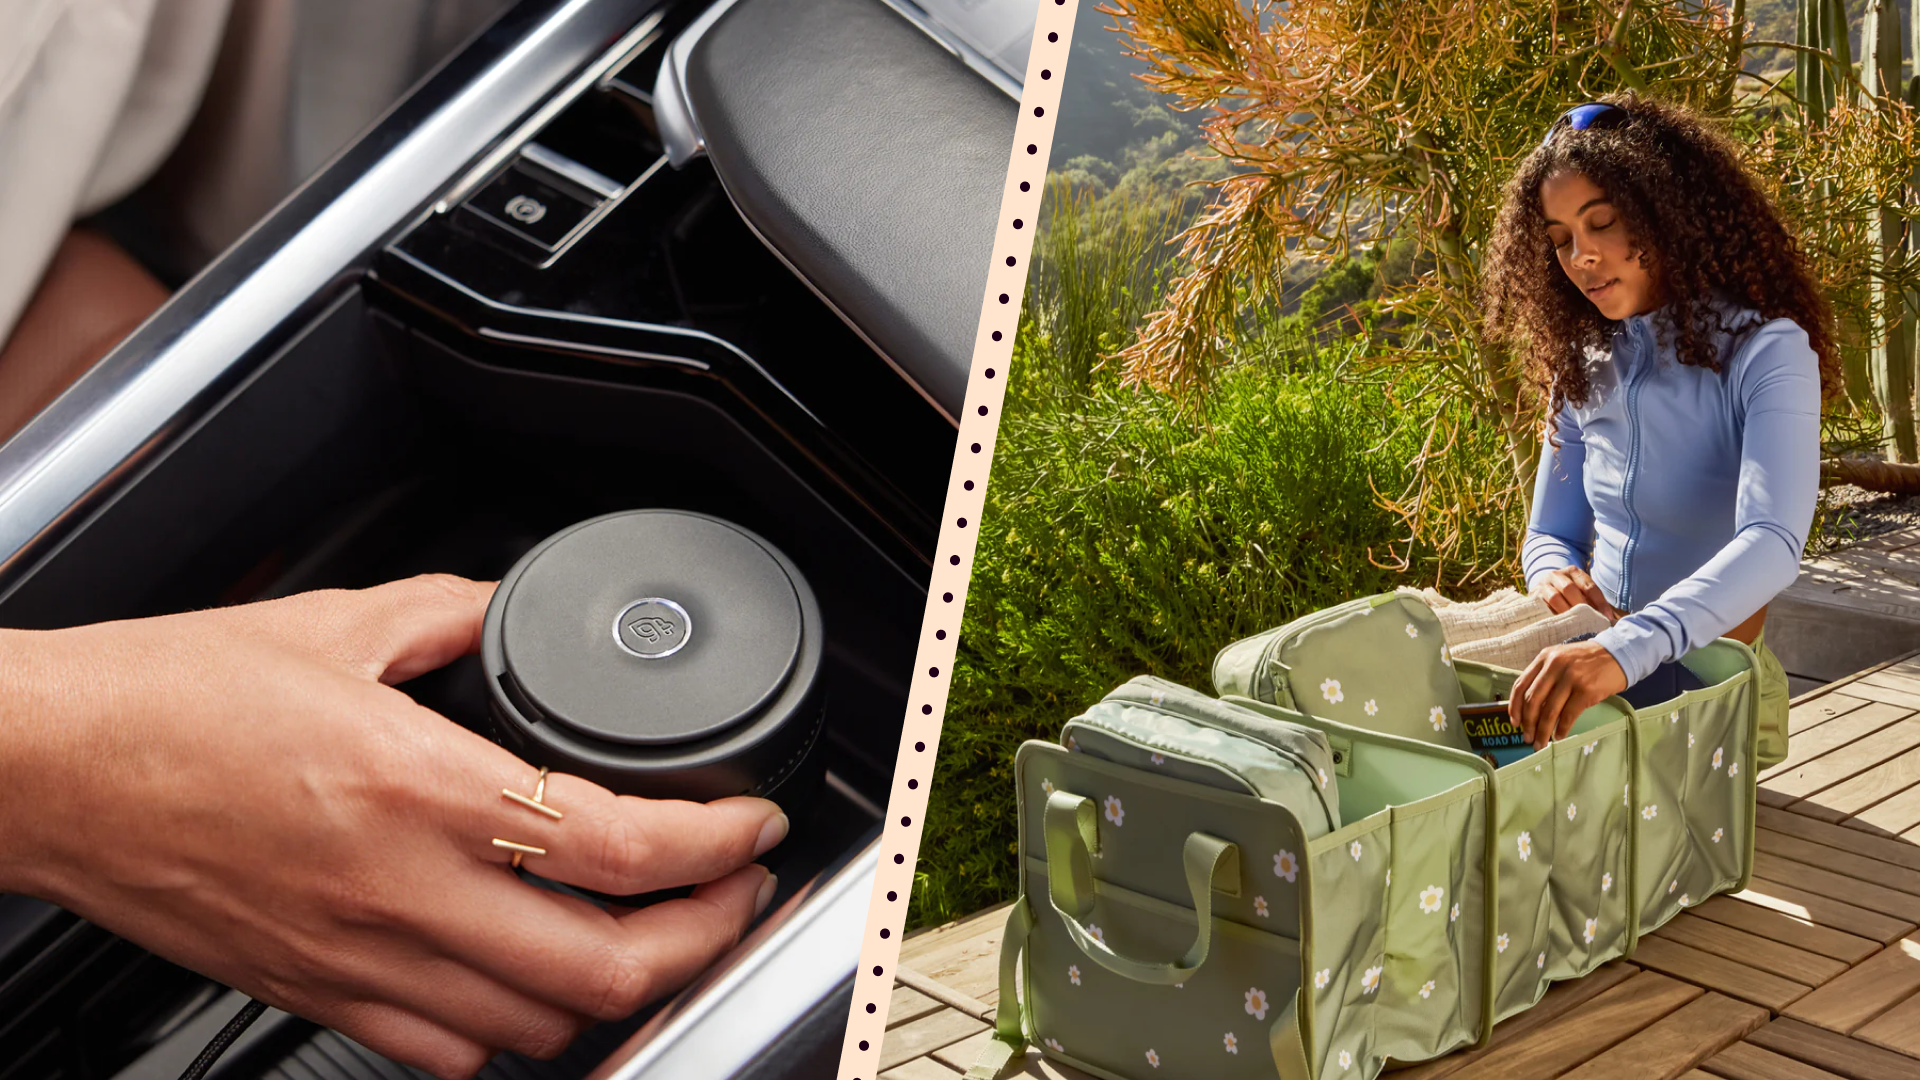 20 products under $25 to keep your car clean and organized